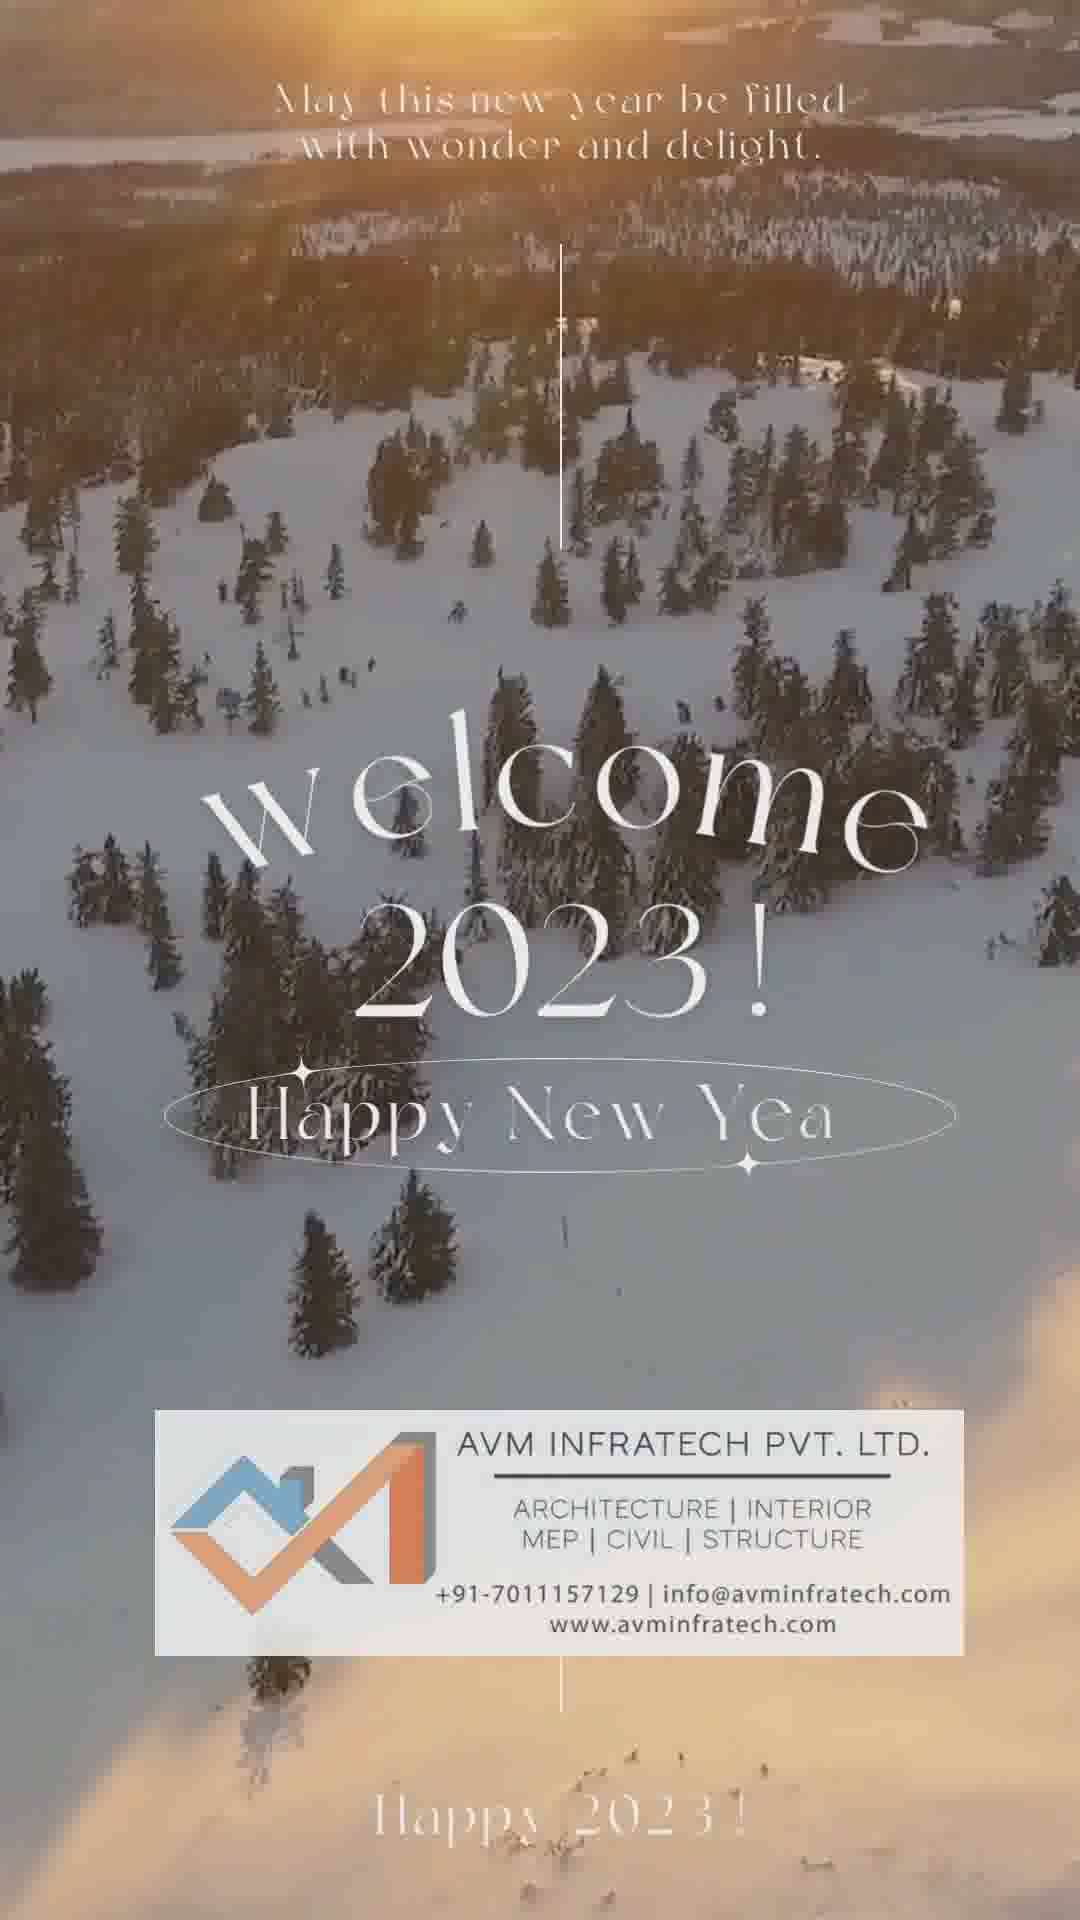 Wishing you and your family a very Happy New Year 2023!


Follow us for more such amazing updates. 
.
.
#hny #nye #happy #happynewyear #happynewyear2023 #2023 #wishes #bestwishes #celebration #avminfratech #newyear #newyear2023 #new #year #welcome #welcome2023 #goodbye2022 #architect #architecture #interior #civil #structure #mep #consultancy #consultant #consultation #company #construction